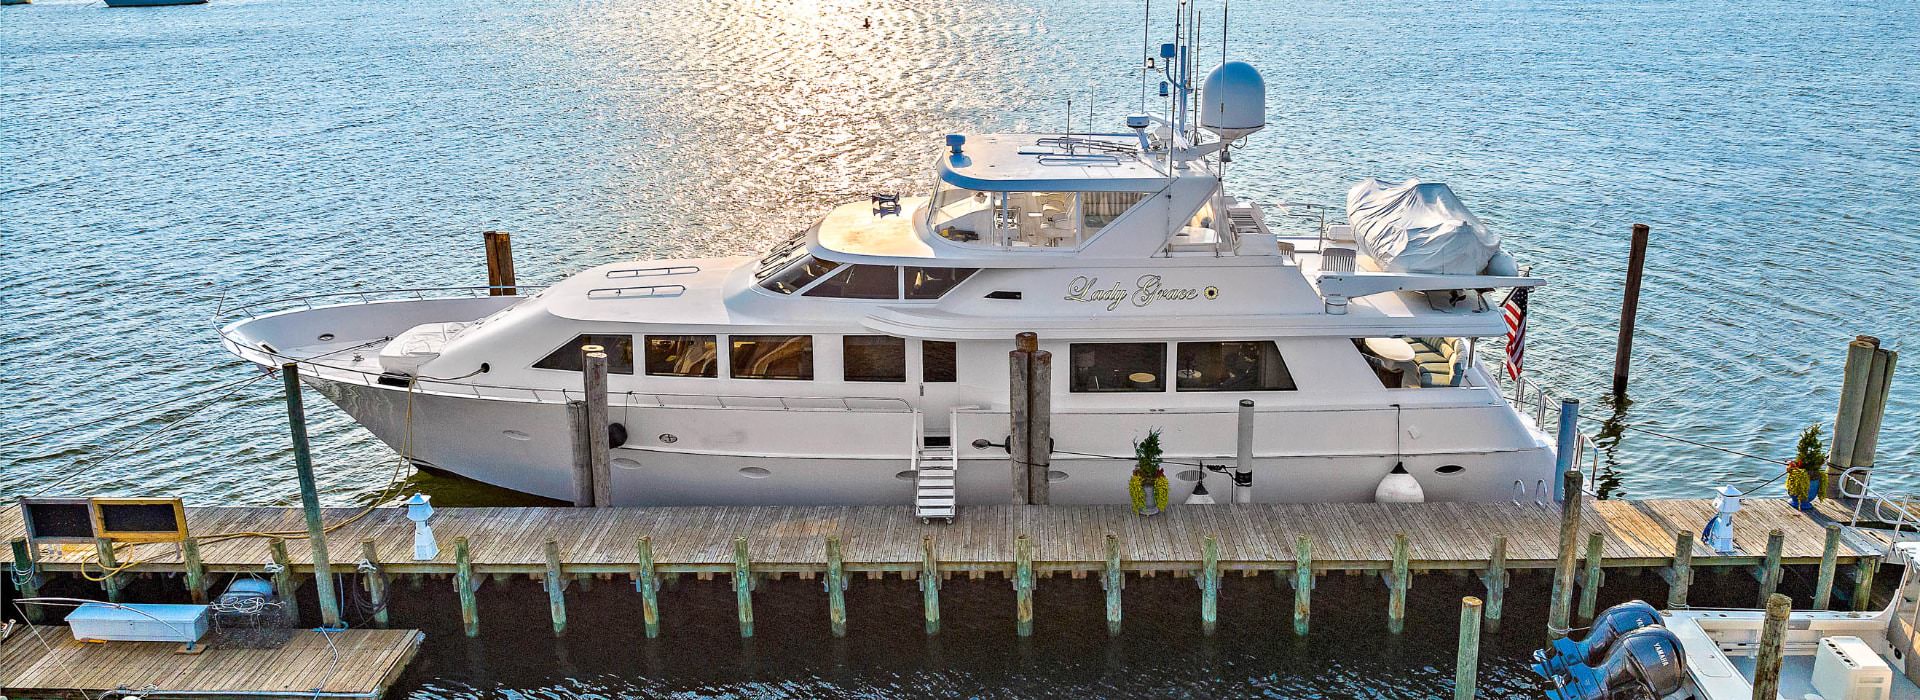 92-foot white yacht named Lady Grace on the water